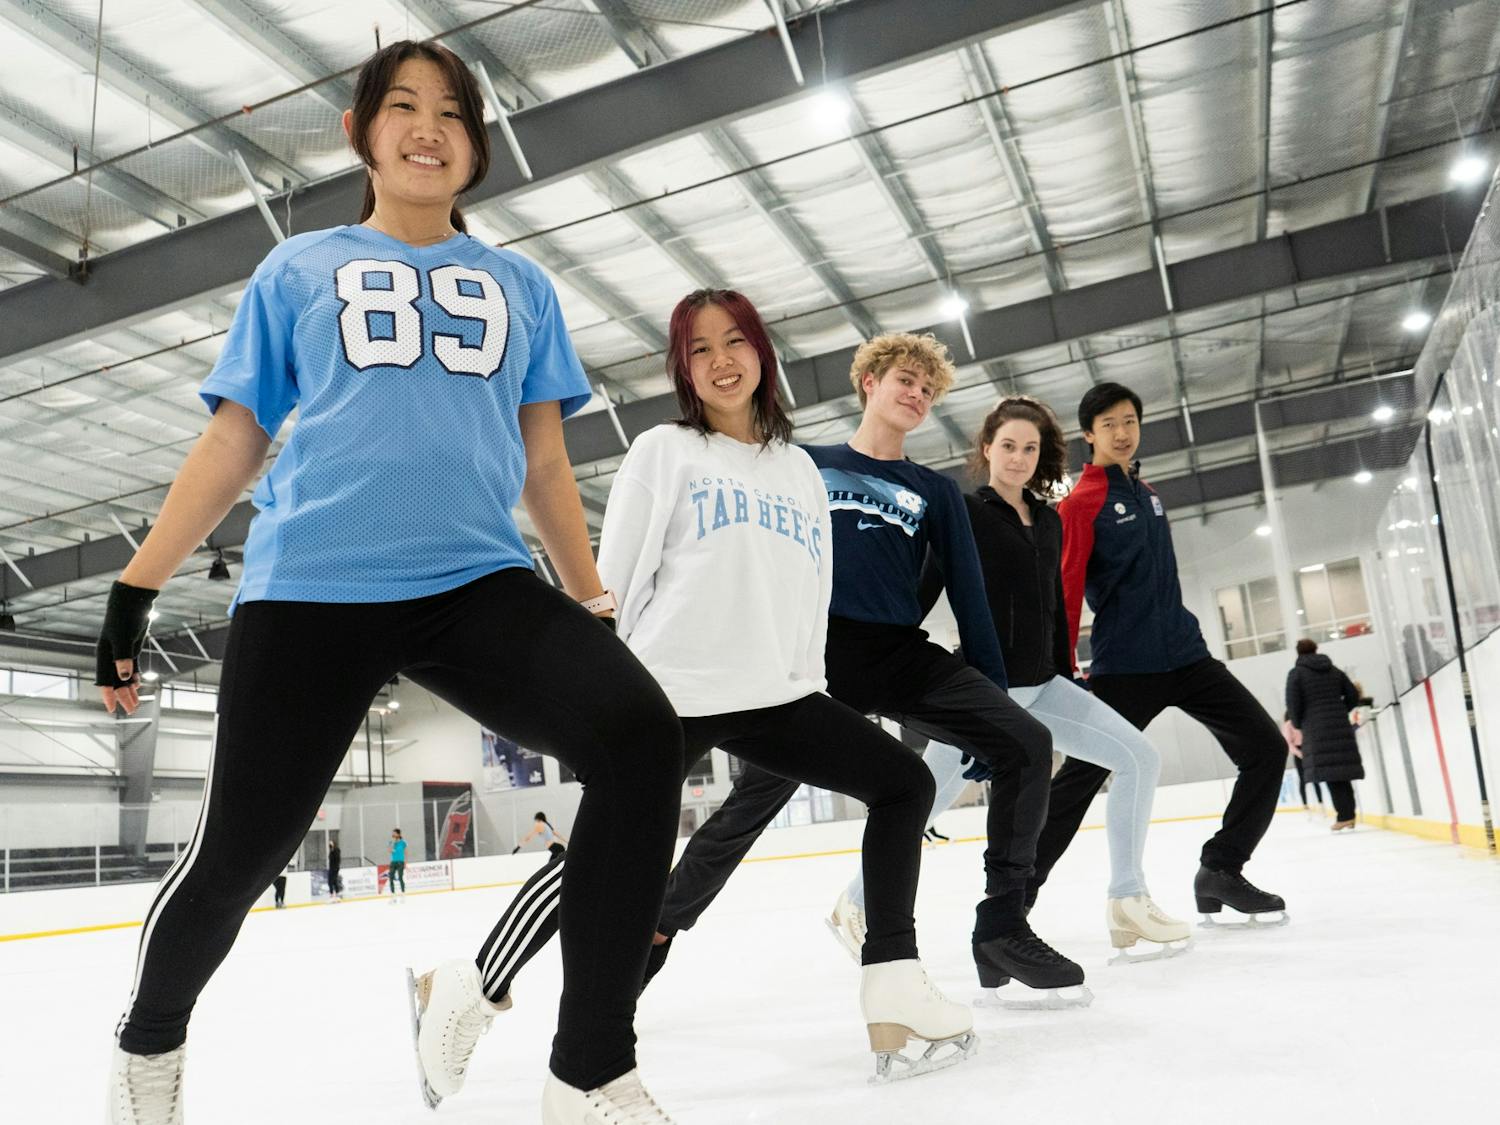 Members of the UNC Figure Skating Club pose for a portrait at the Wake Competition Center in Cary, N.C. on Wednesday, Feb. 23, 2022. The club organizes practices for skaters of all levels and holds public skates on Fridays.